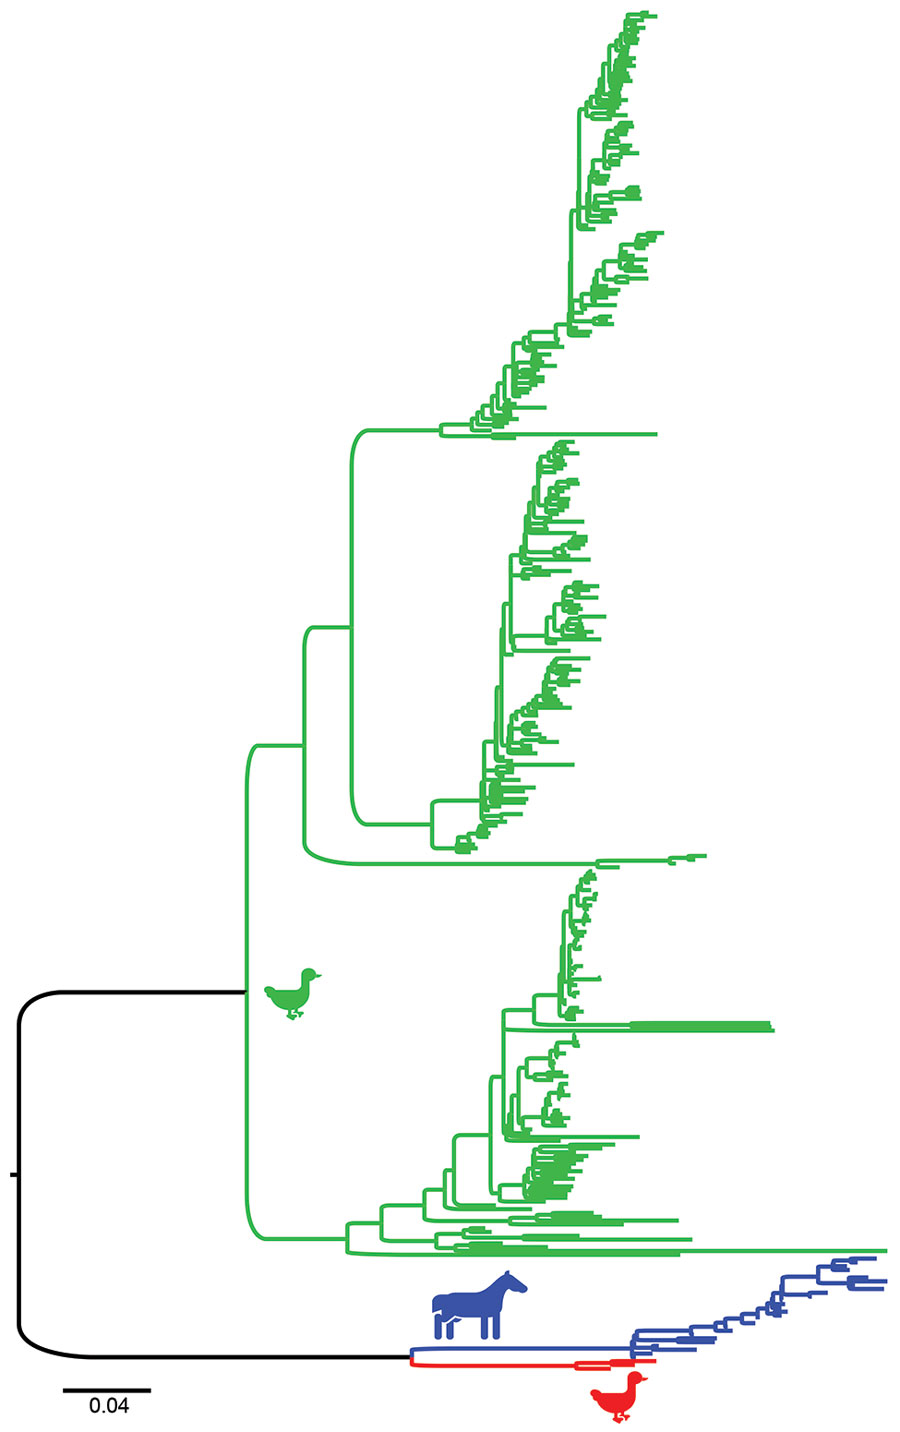 Maximum-likelihood phylogenetic tree showing the relationship between equine influenza (H3N8) viruses (blue), equine-like avian influenza viruses (AIVs) from Chile (red), and AIVs from other locations (green) for the H3 gene fragment. Scale bars indicate average nucleotide substitutions per site. A complete tree, taxon identification, and bootstrap support are shown in Appendix Figure 1.